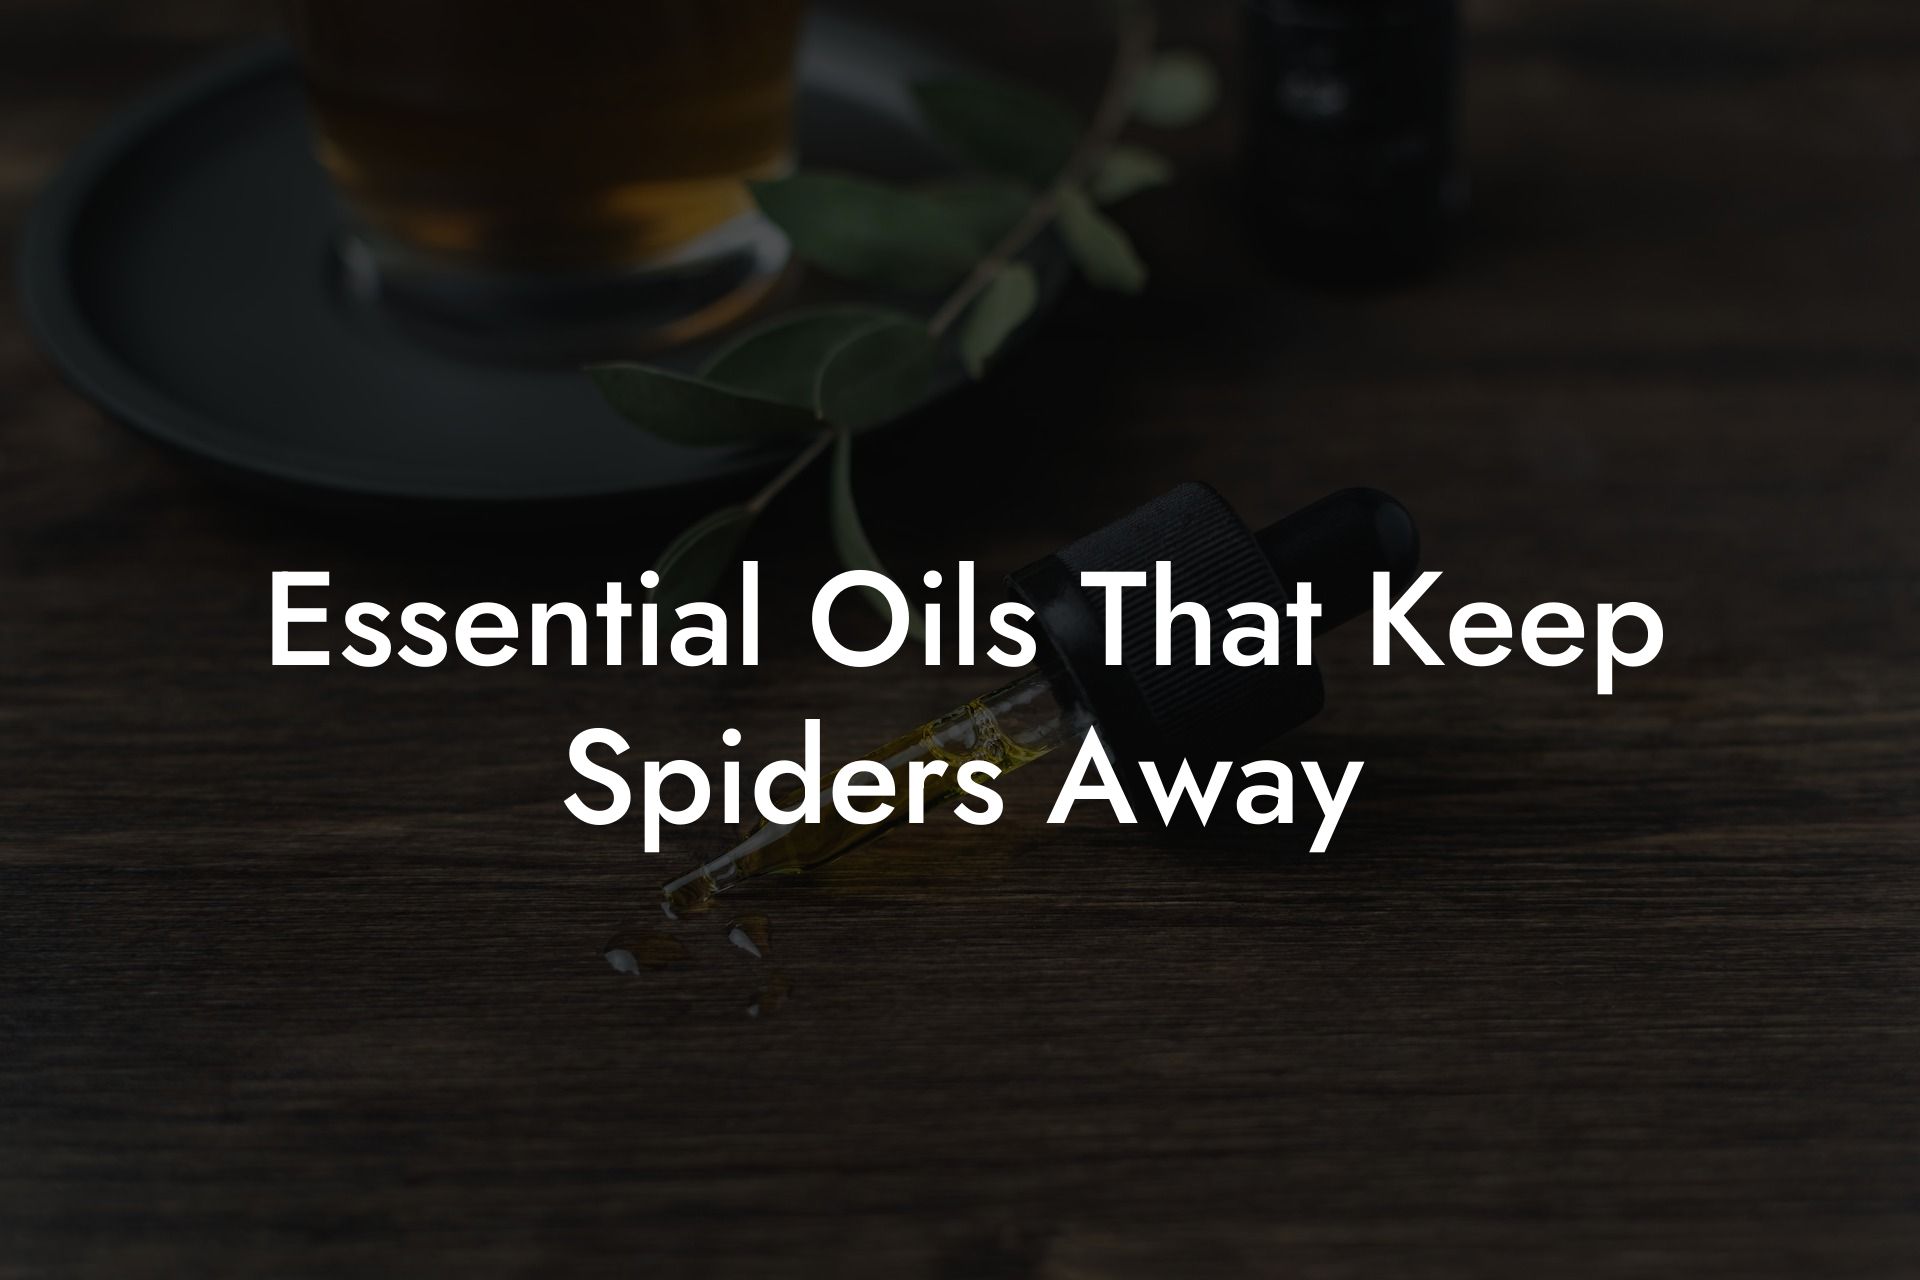 Essential Oils That Keep Spiders Away